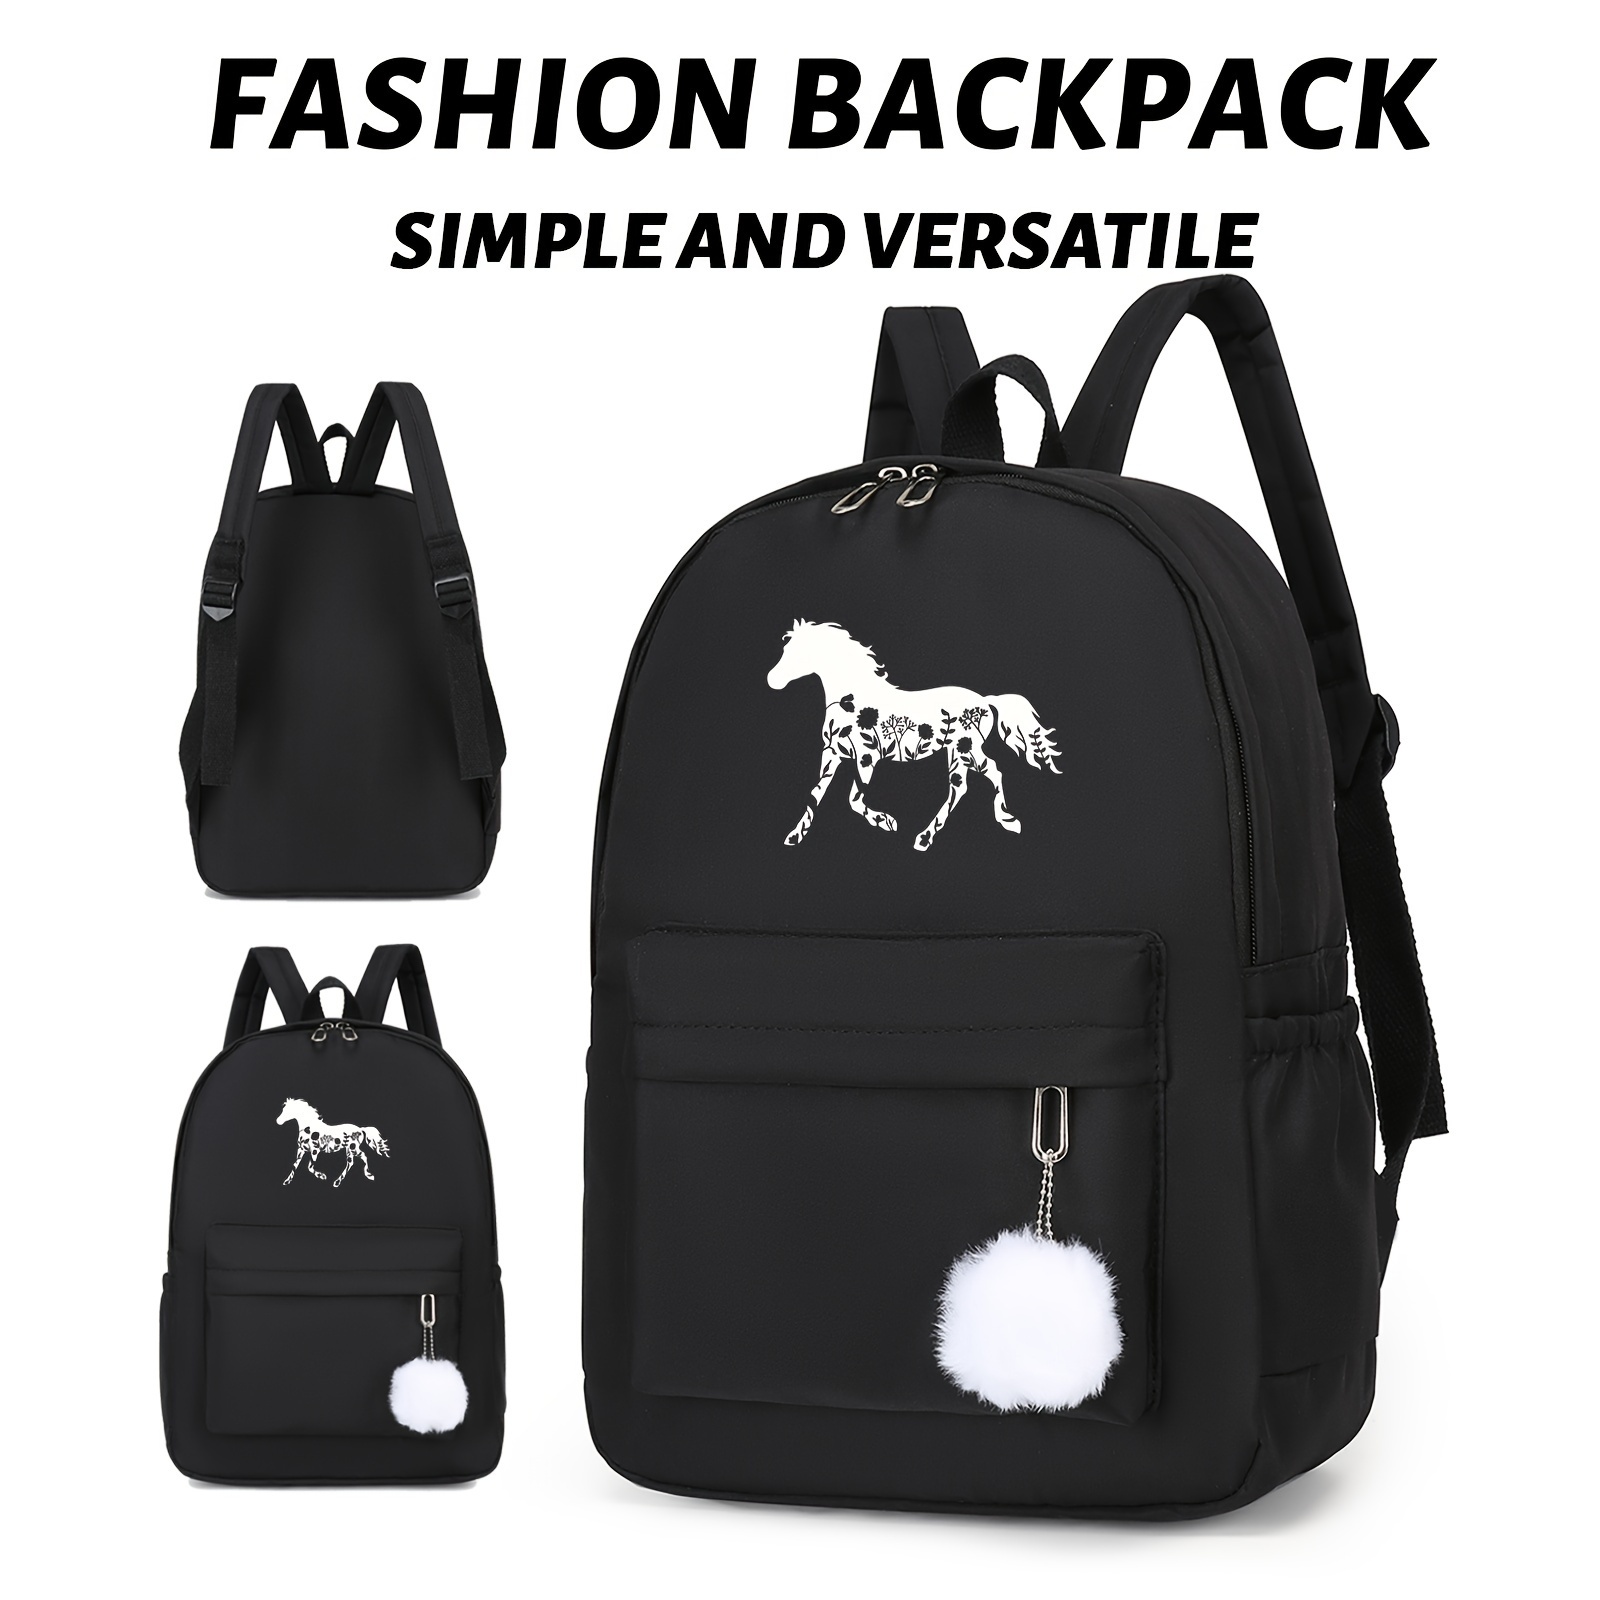 

Running Horse Print Solid Color Backpacks With Side Pockets & Cute Furry Toy Decor, Adjustable Shoulder Straps Casual Preppy Style Knapsacks For Men & Women